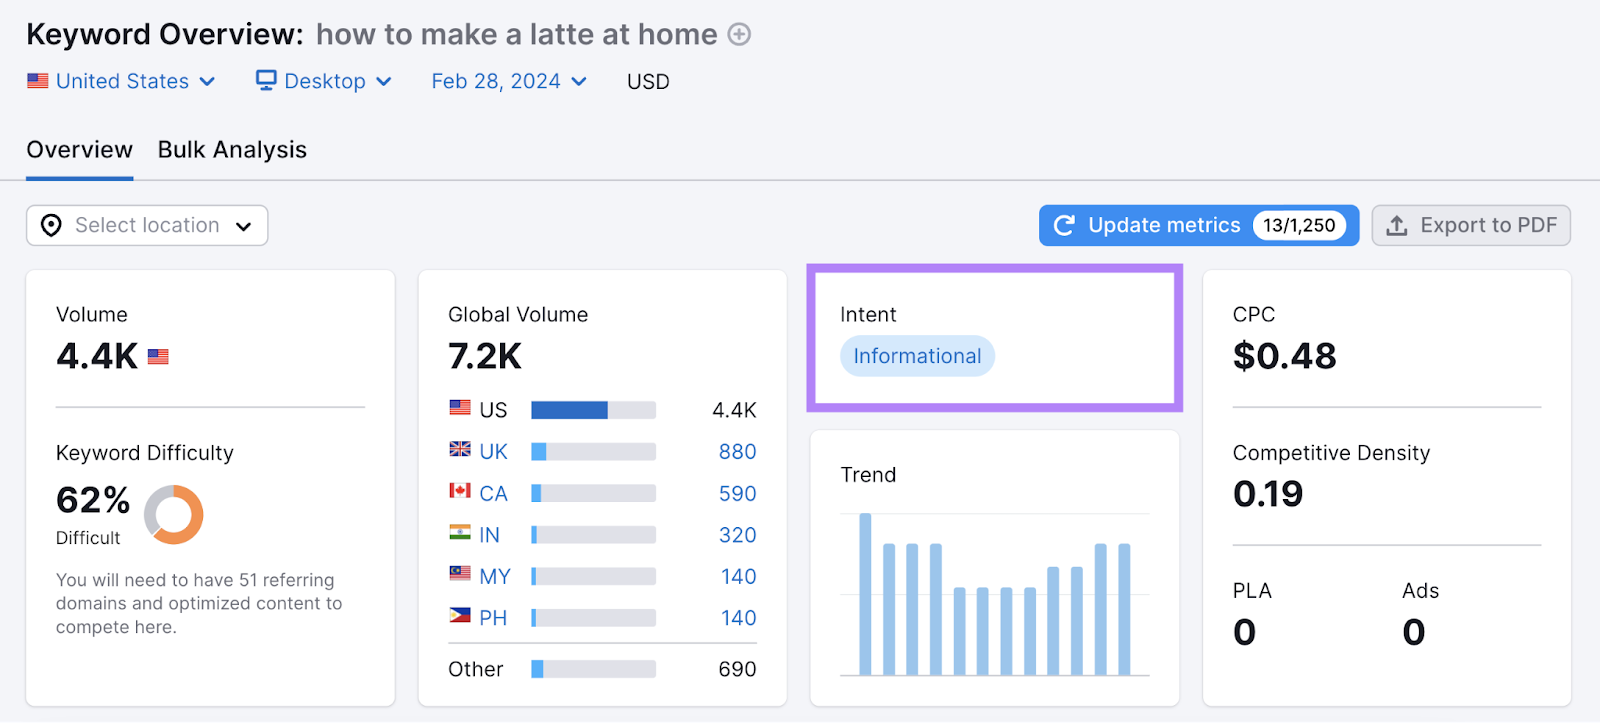 "how to make a latte at home" keyword has informational search intent